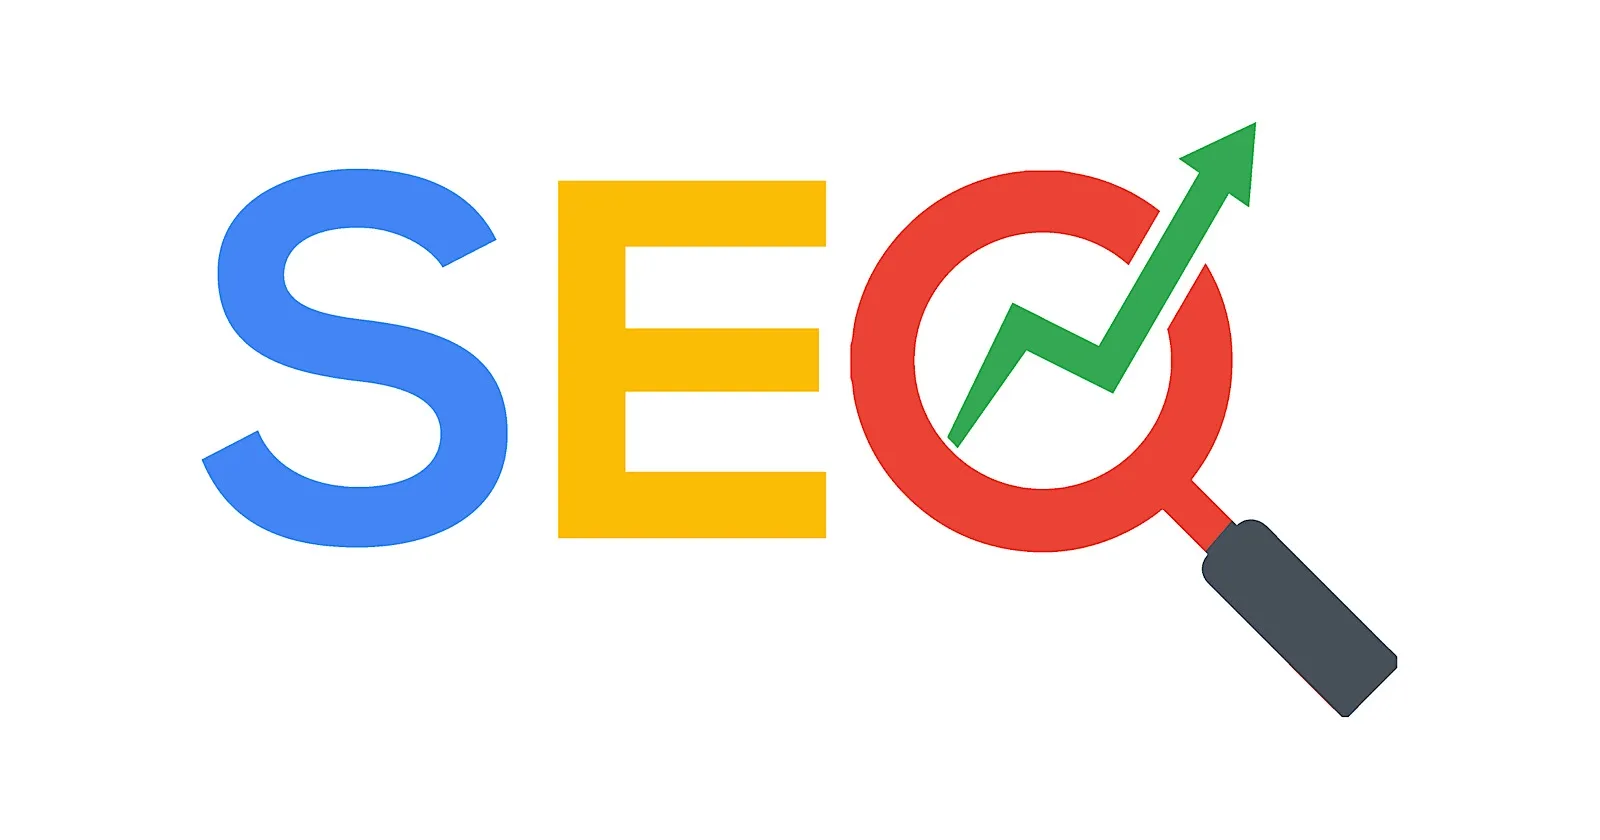 Add the Focus Keyword to Improve Your SEO Strategy 2023